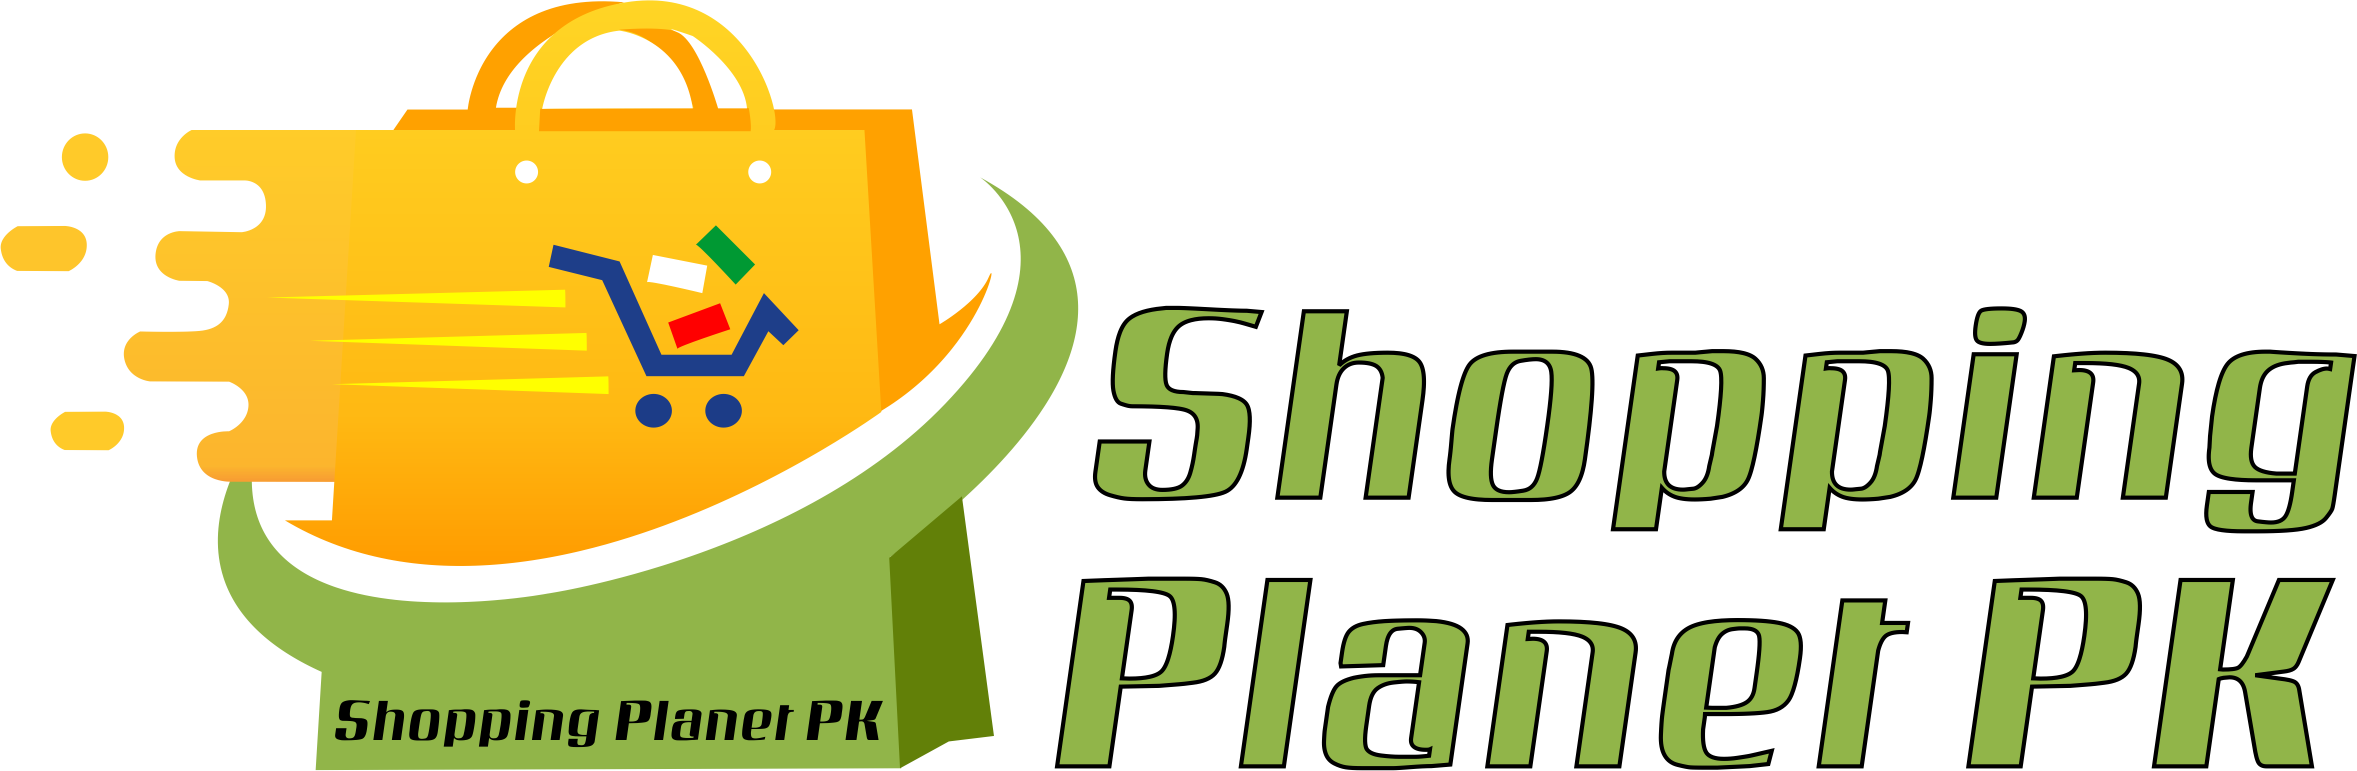 Privacy Policy for Shopping Planet Pk